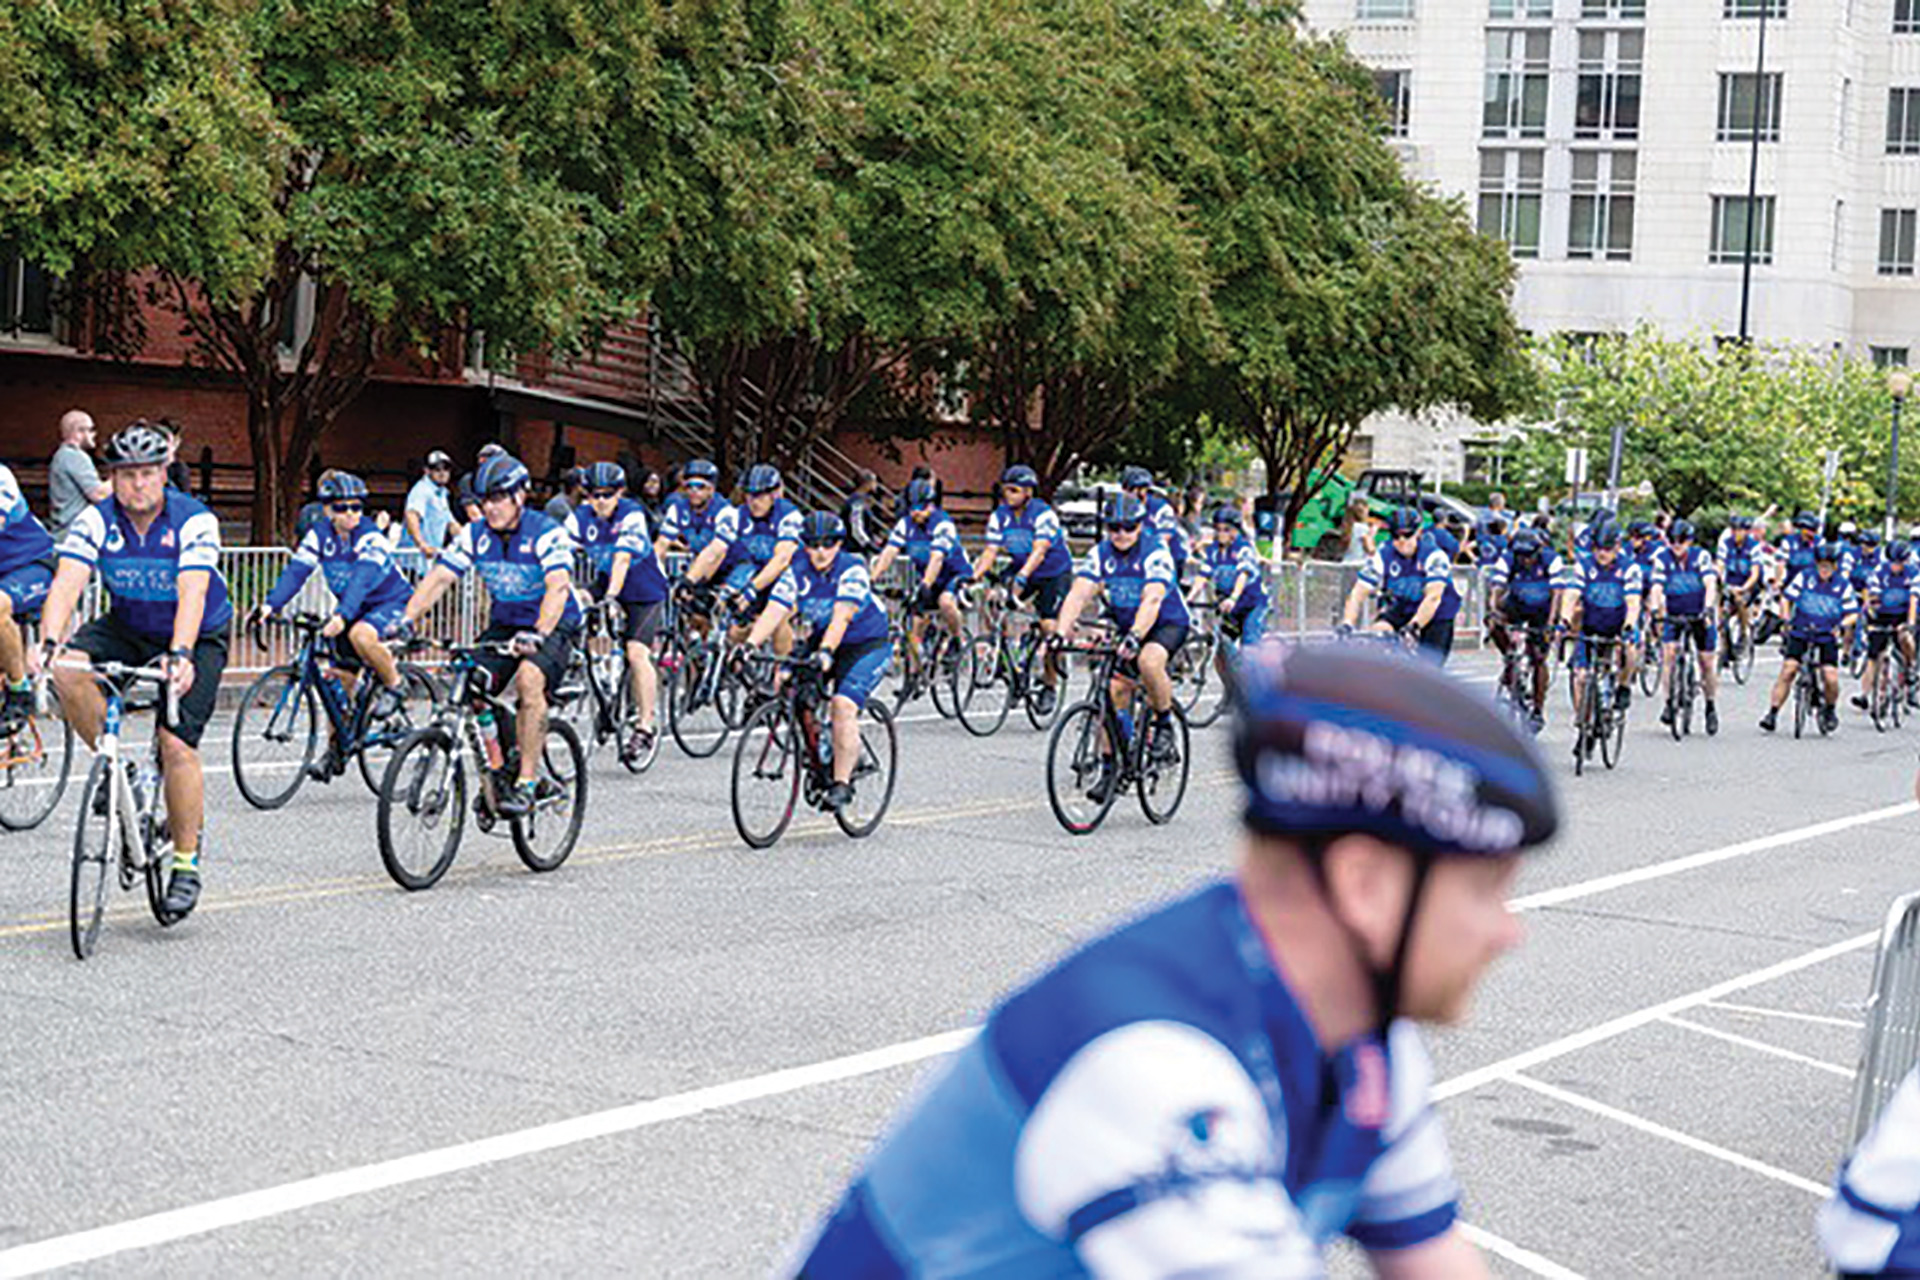 national-police-week-2021-3-the-riders-of-the-police-unity-tour-rolling-into-d-c